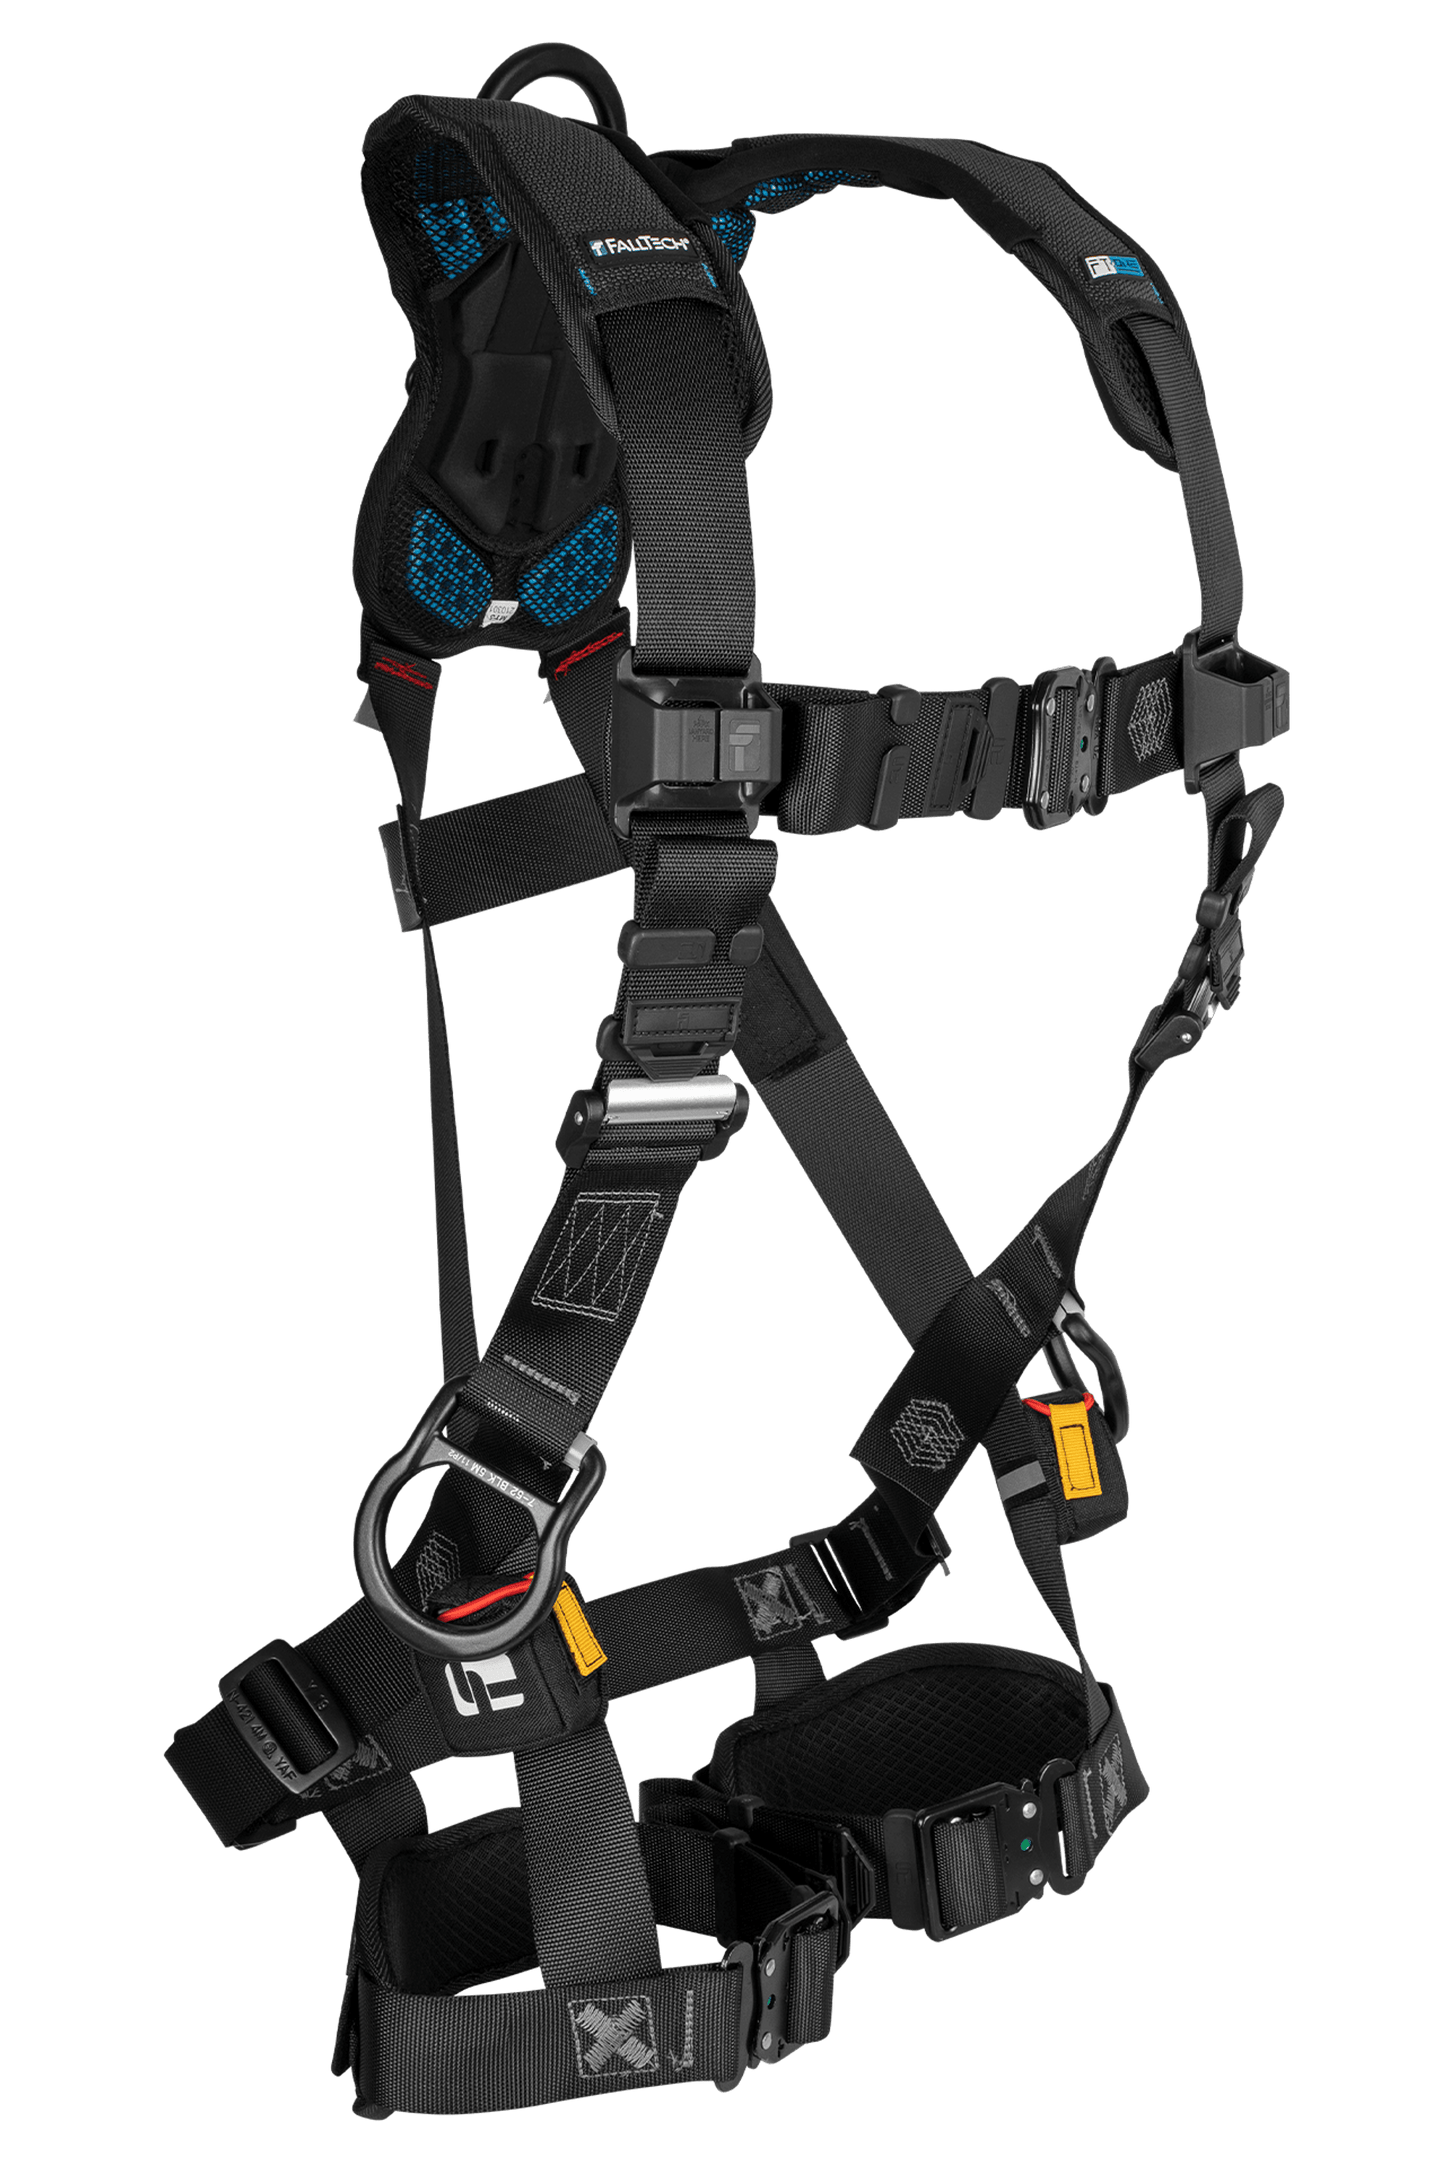 Woman's FT-ONE FIT Harness with Quick Connect Chest and Leg Straps, Side and Back D-Rings